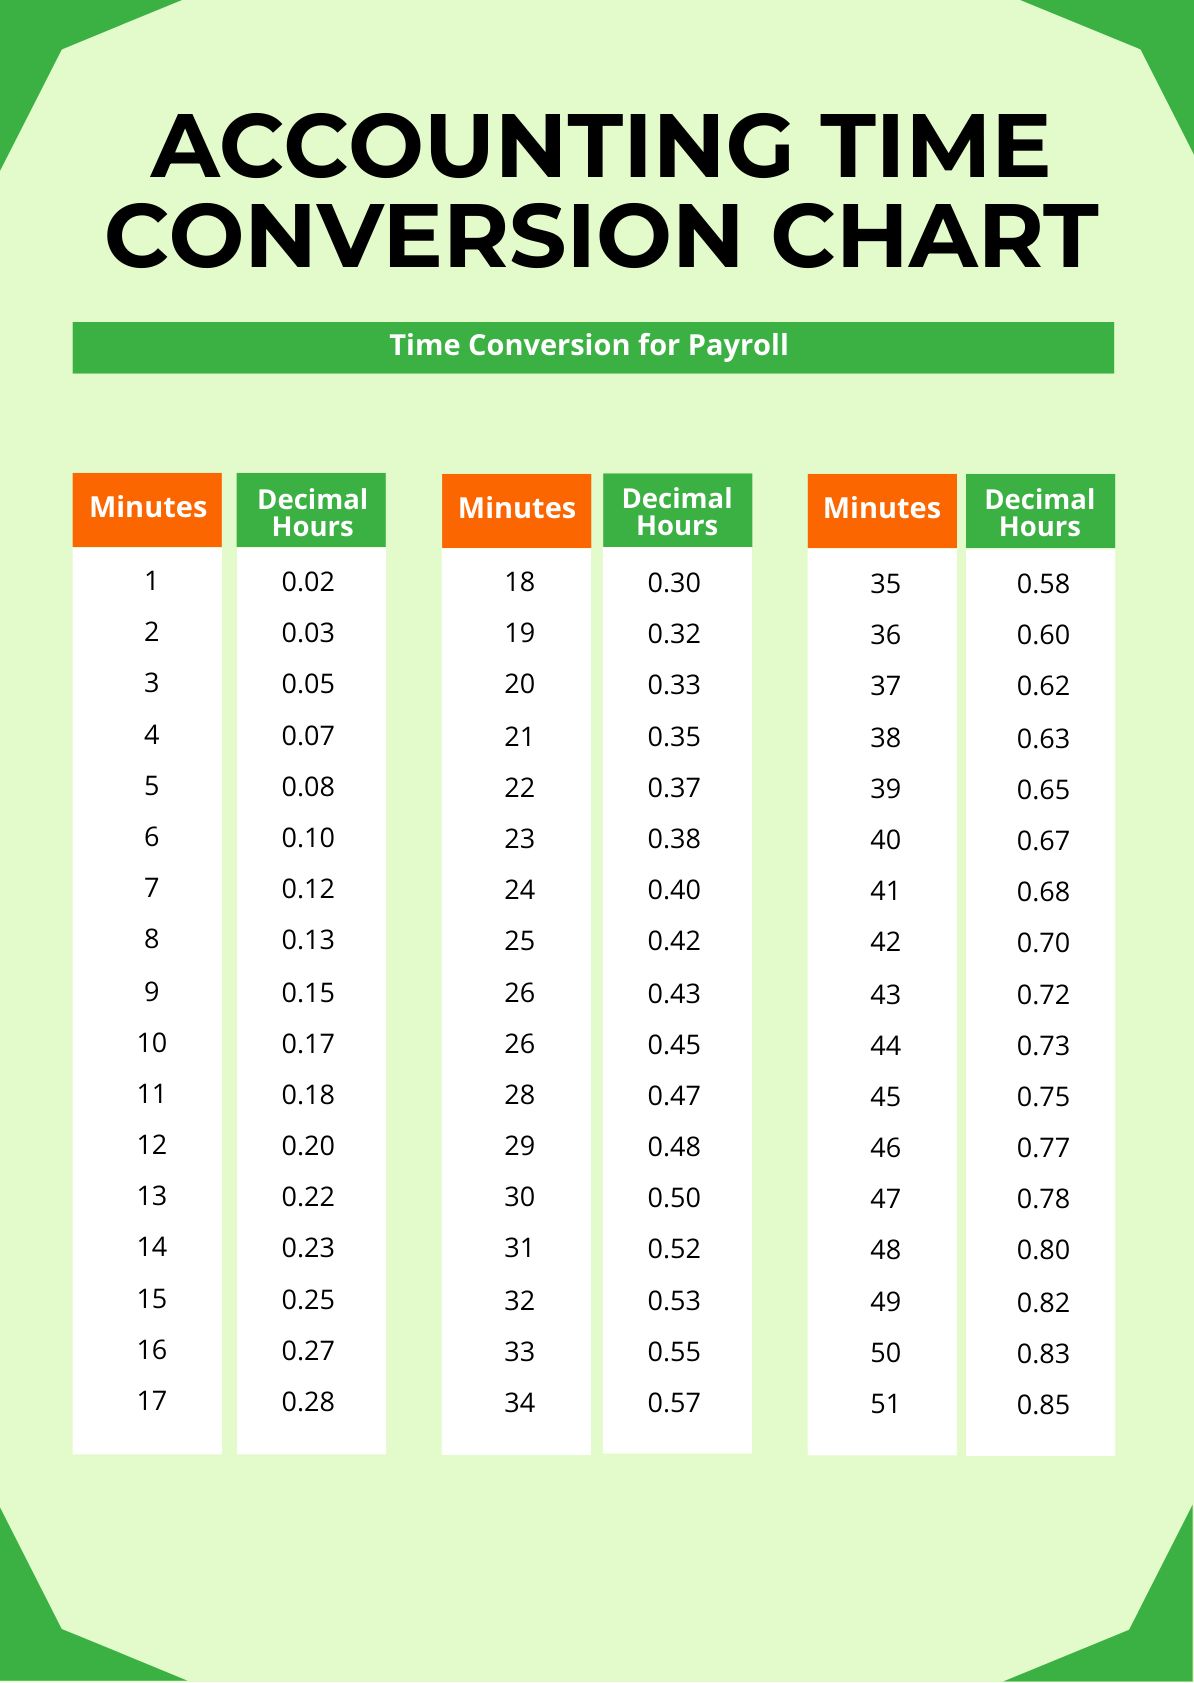 Accounting Time Conversion Chart